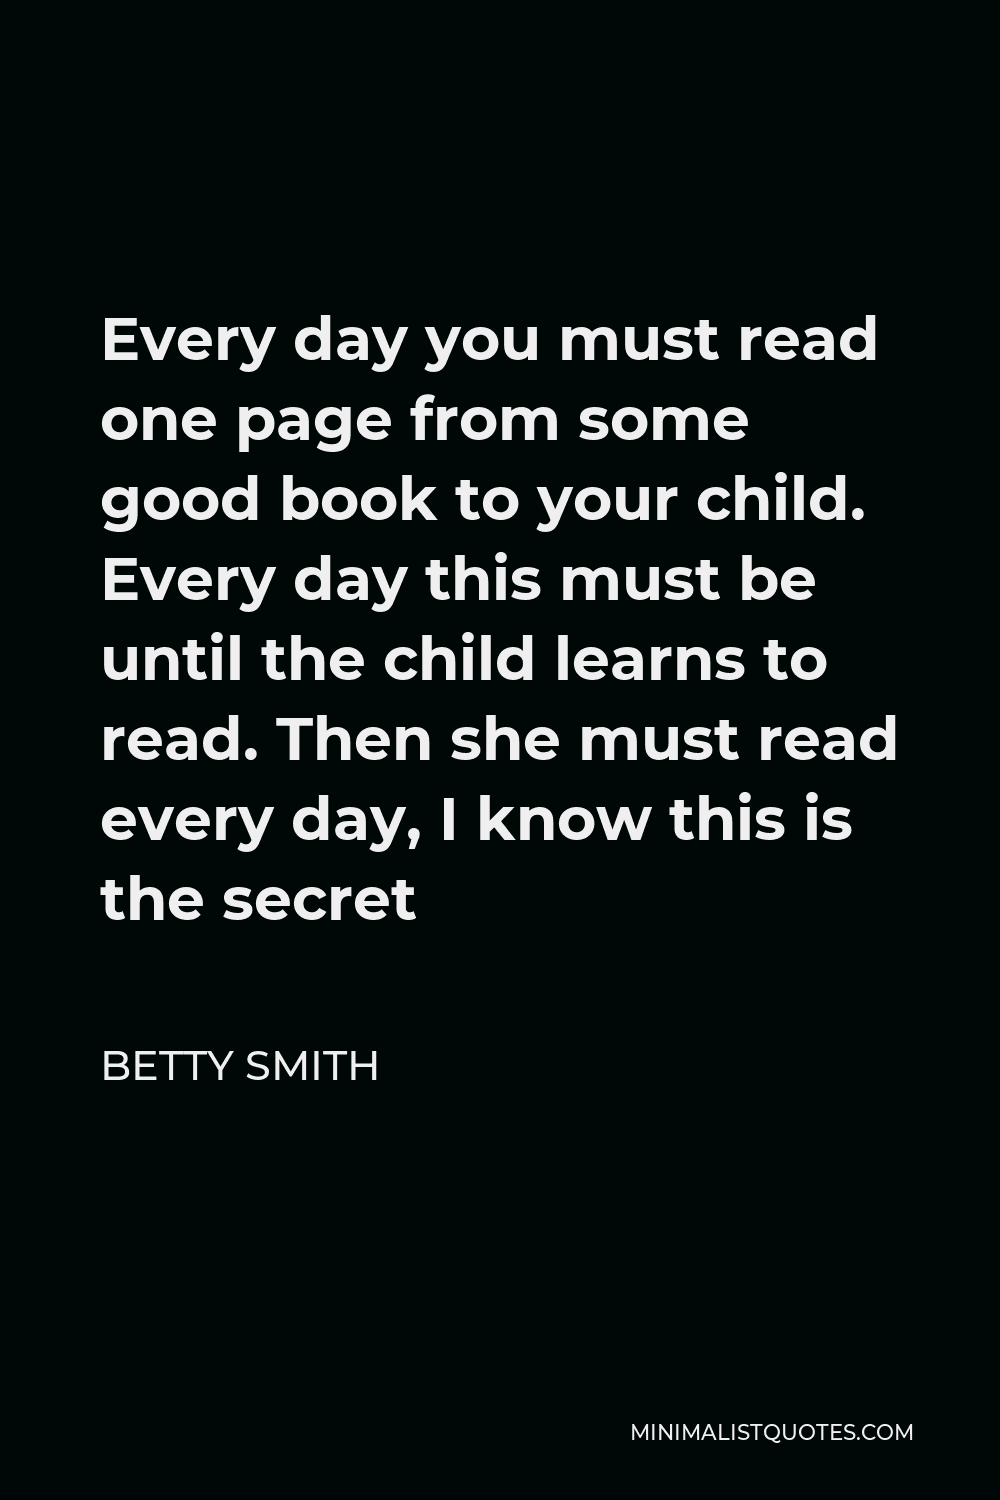 Betty Smith Quote - Every day you must read one page from some good book to your child. Every day this must be until the child learns to read. Then she must read every day, I know this is the secret